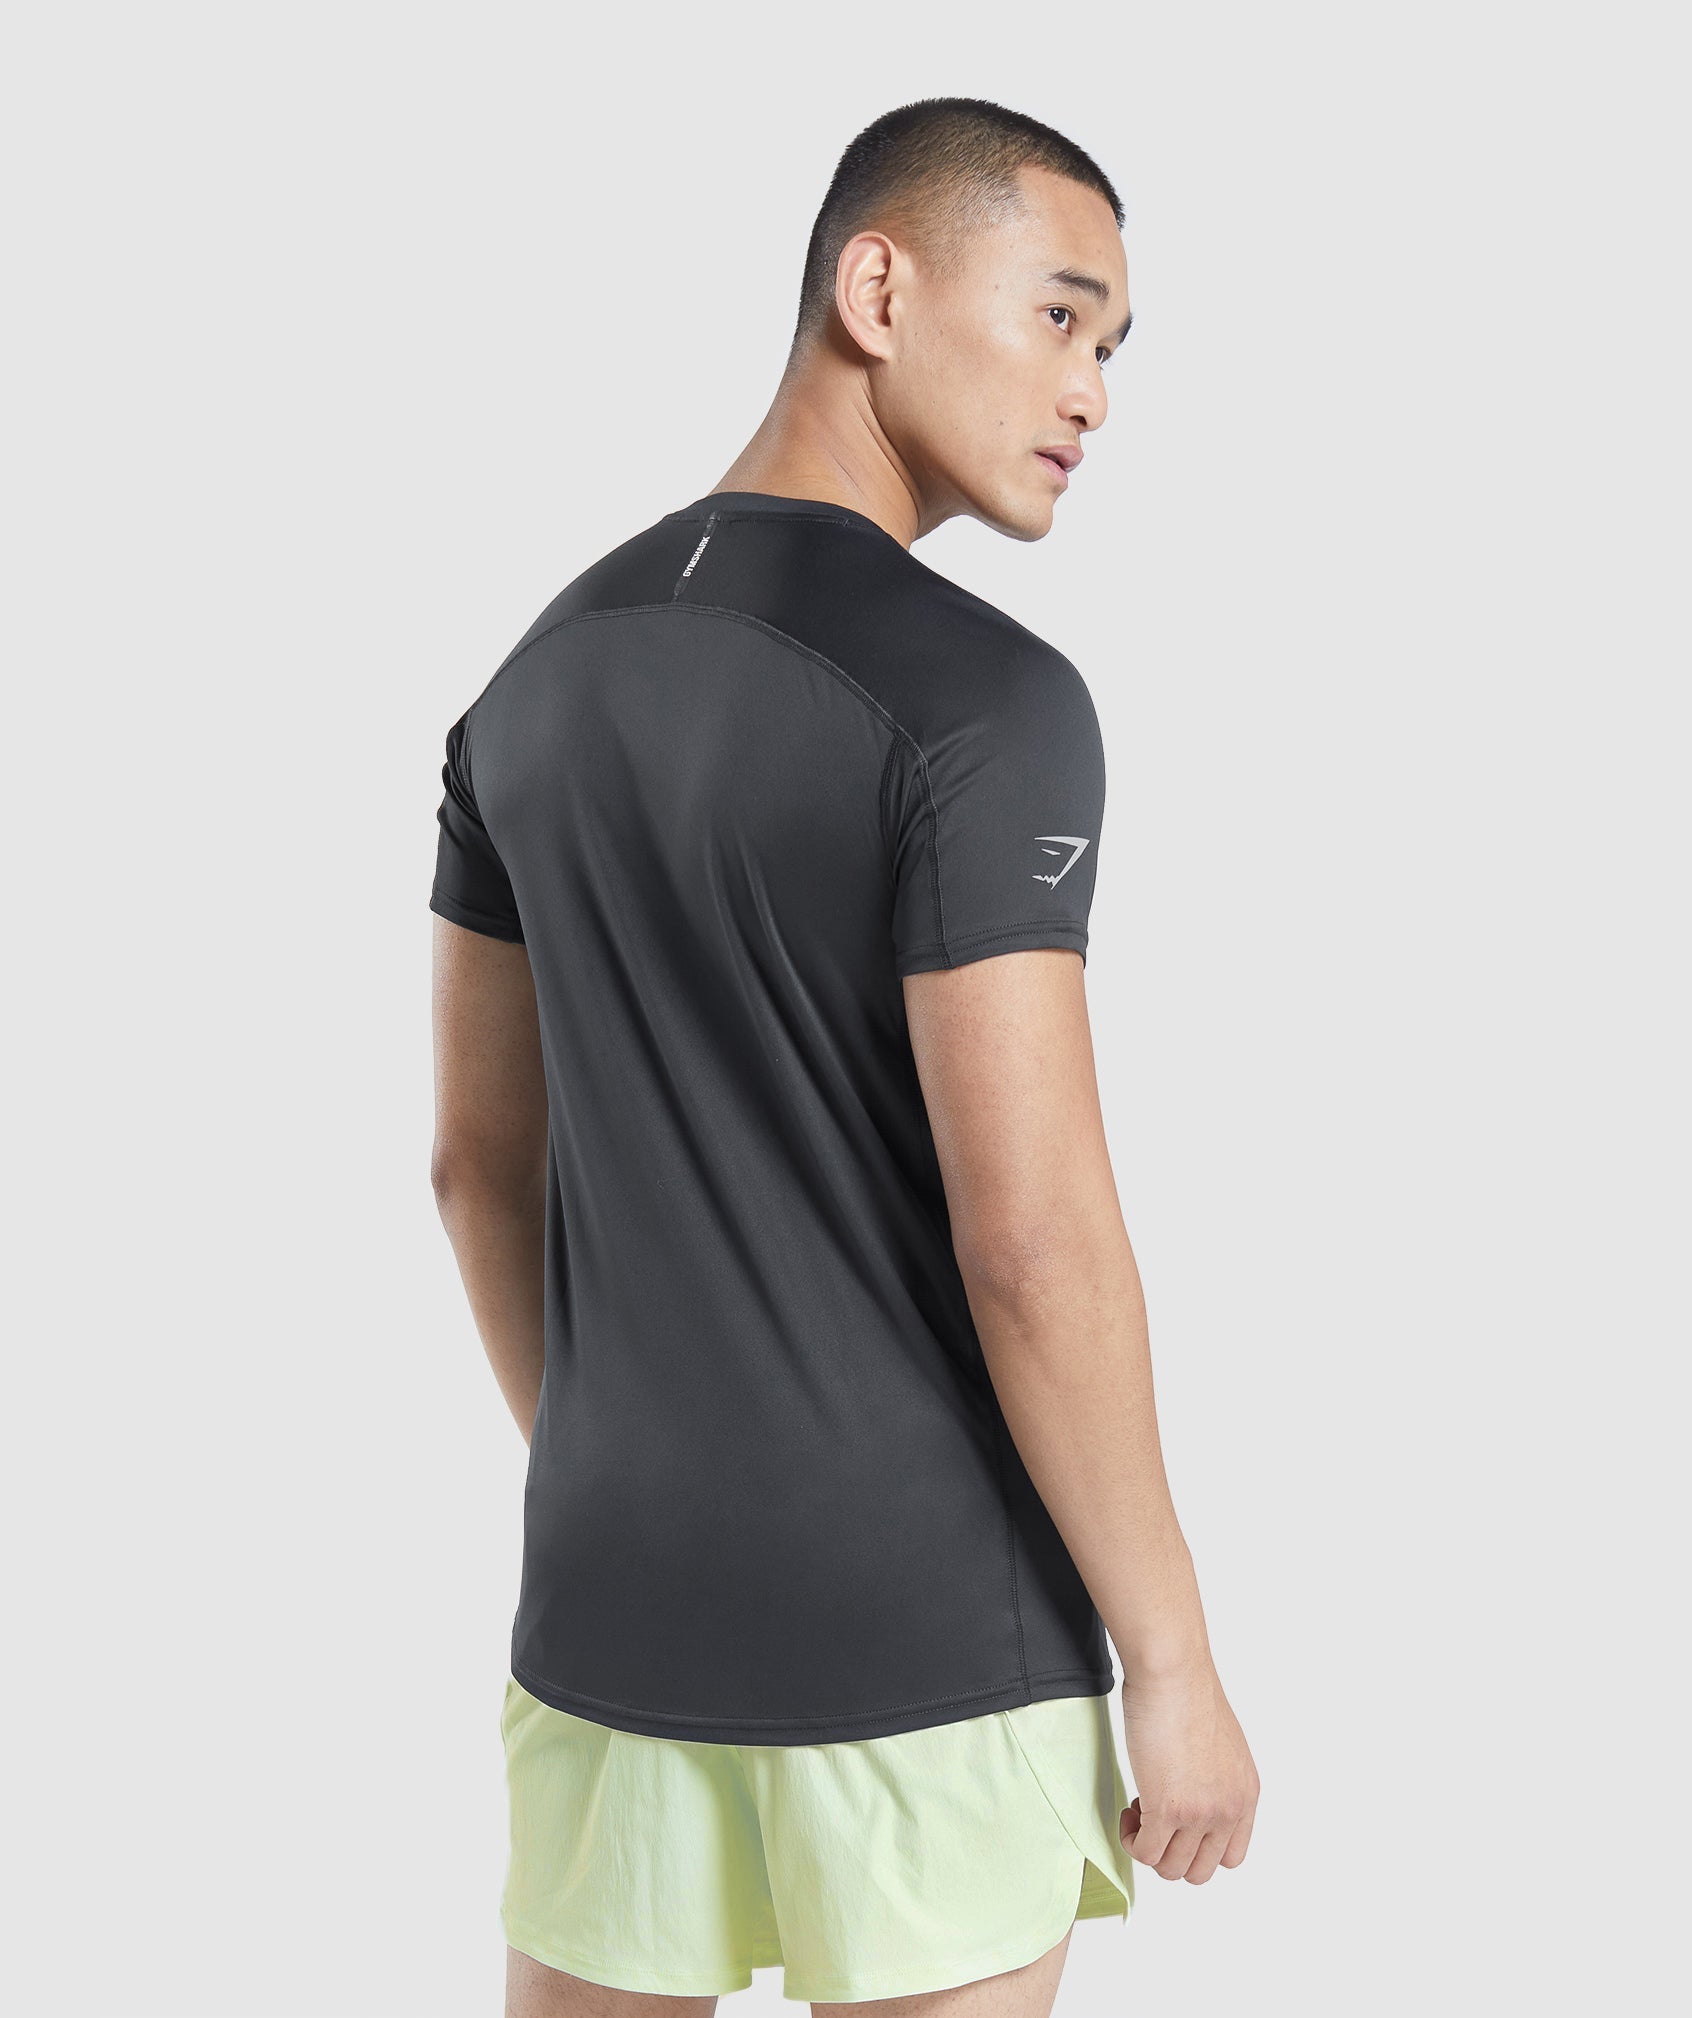 Athleisure Gymwear - GYMSHARK ARRIVAL GRAPHIC T-SHIRT Size Available: (5)  Medium Color: Black Price: ₱1,300